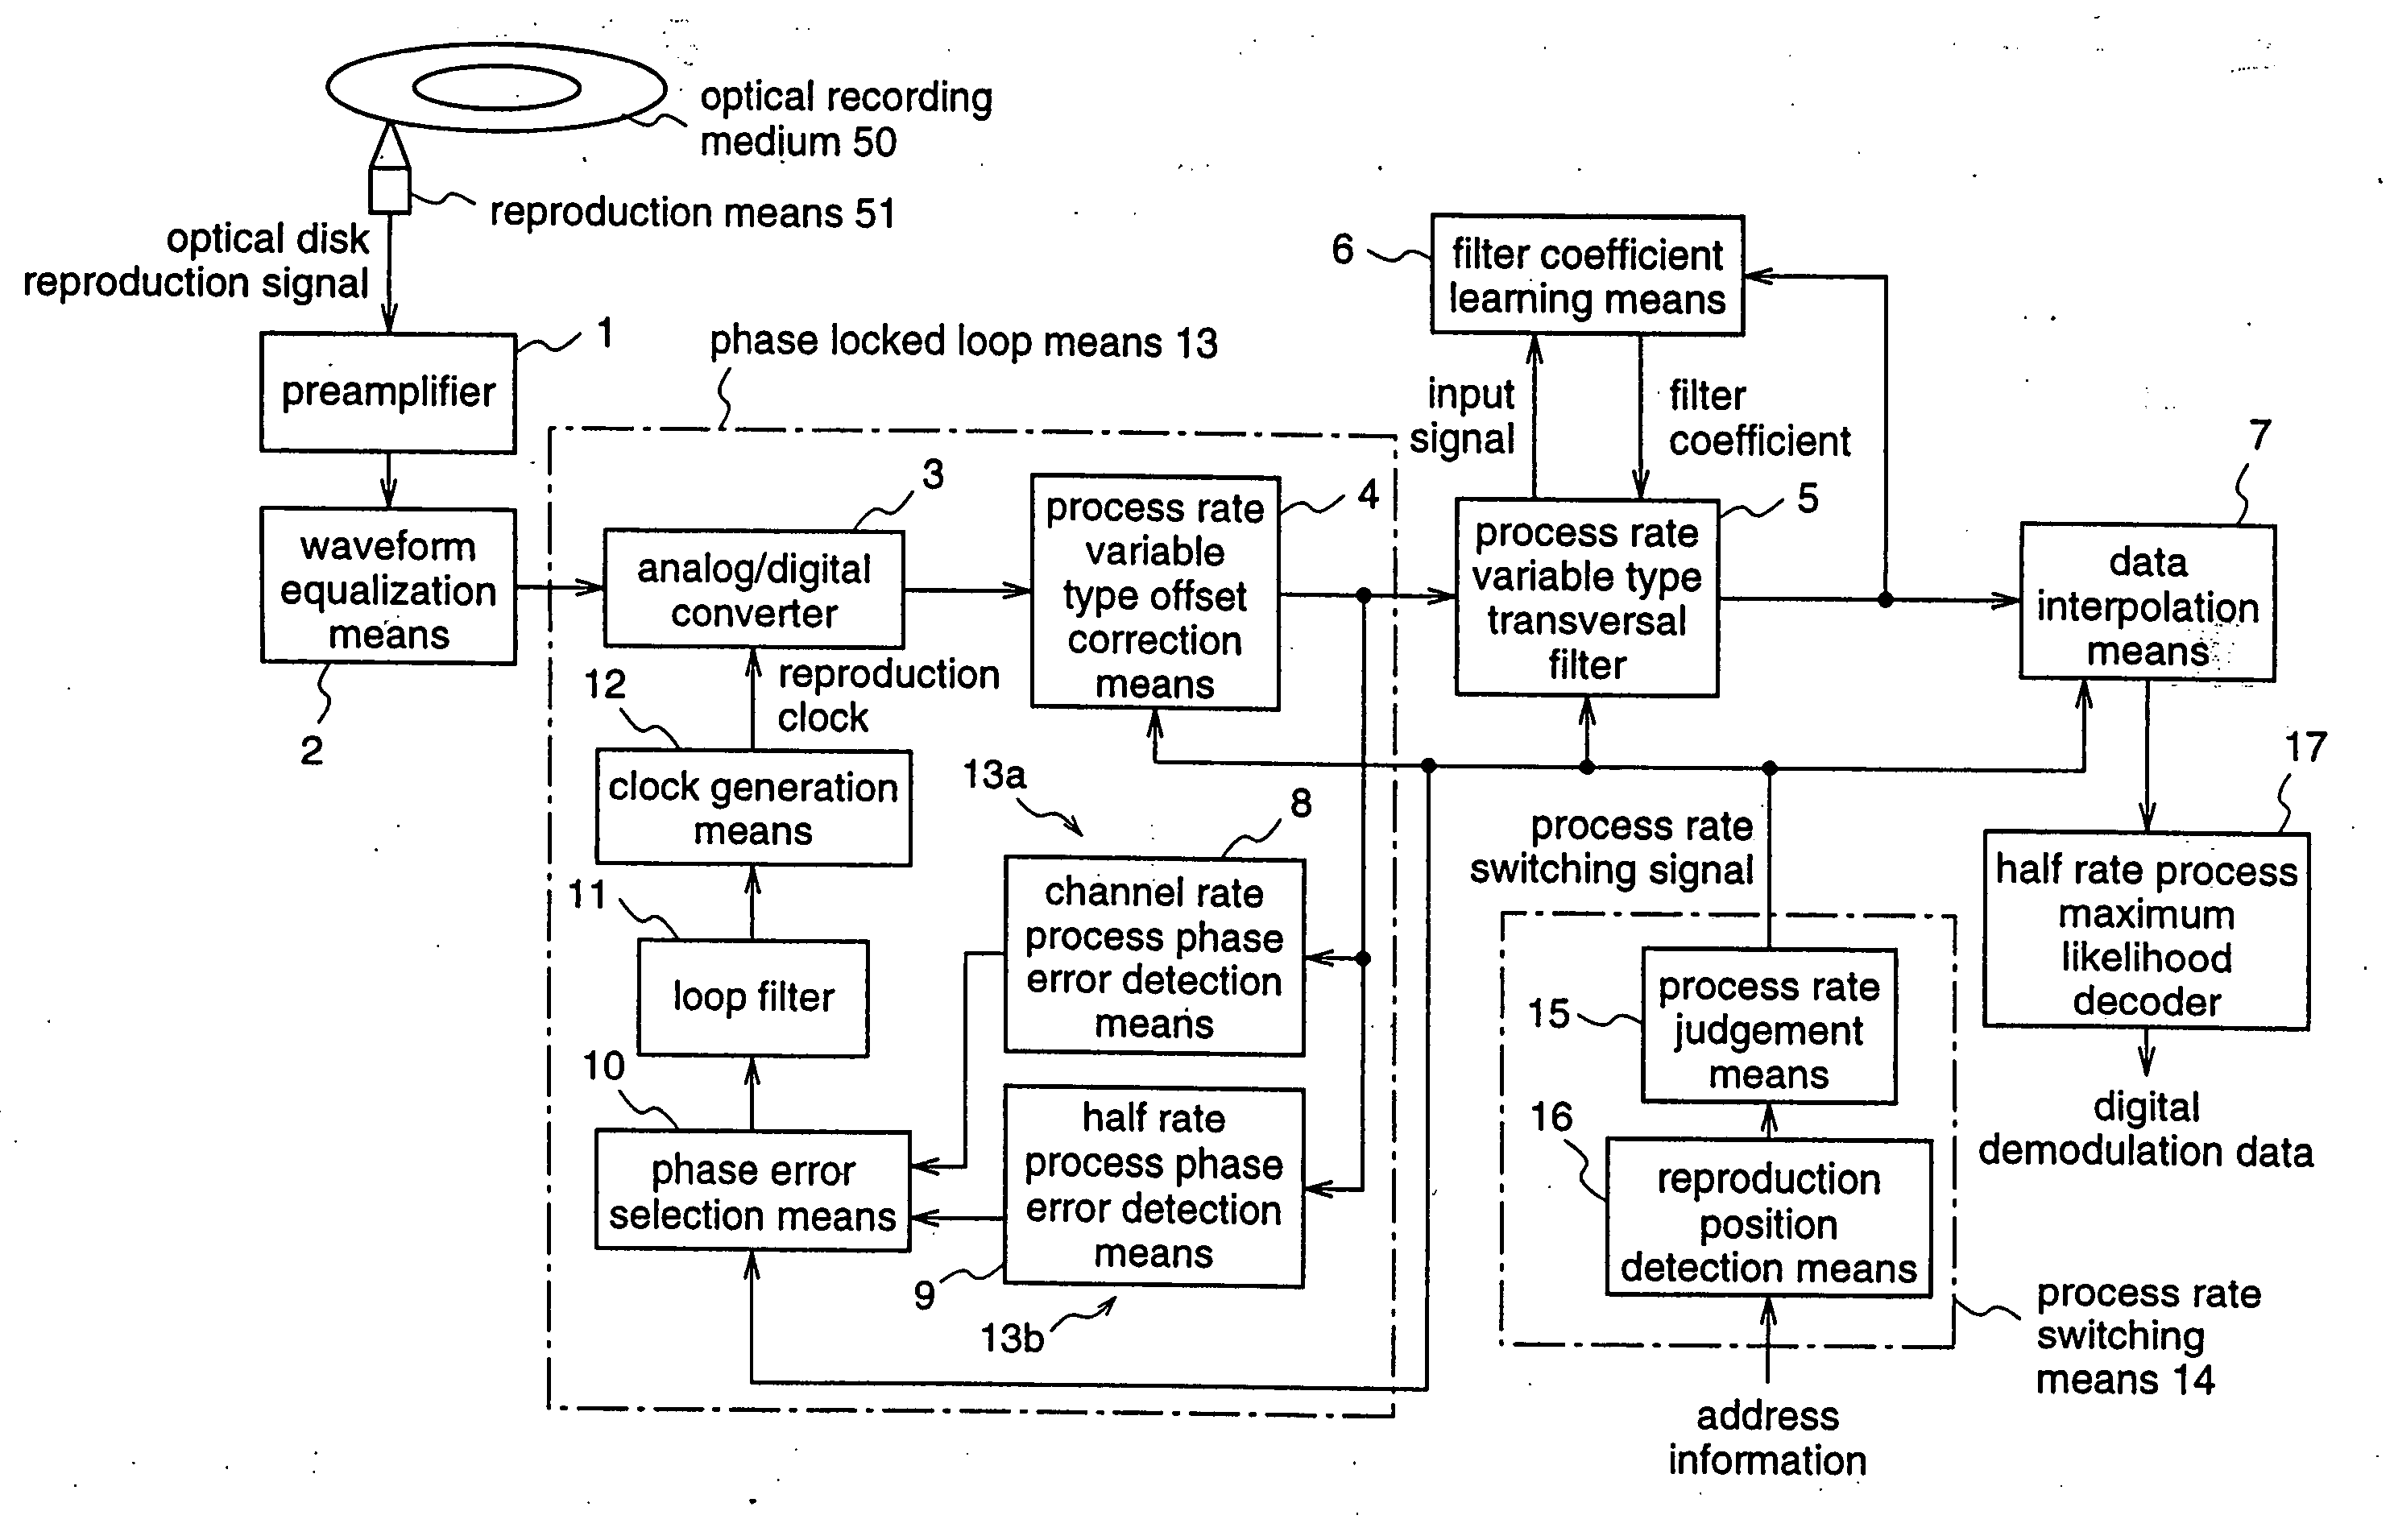 Optical disk reproducing device selectively using a channel bit frequency or a frequency that is half of the channel bit frequency